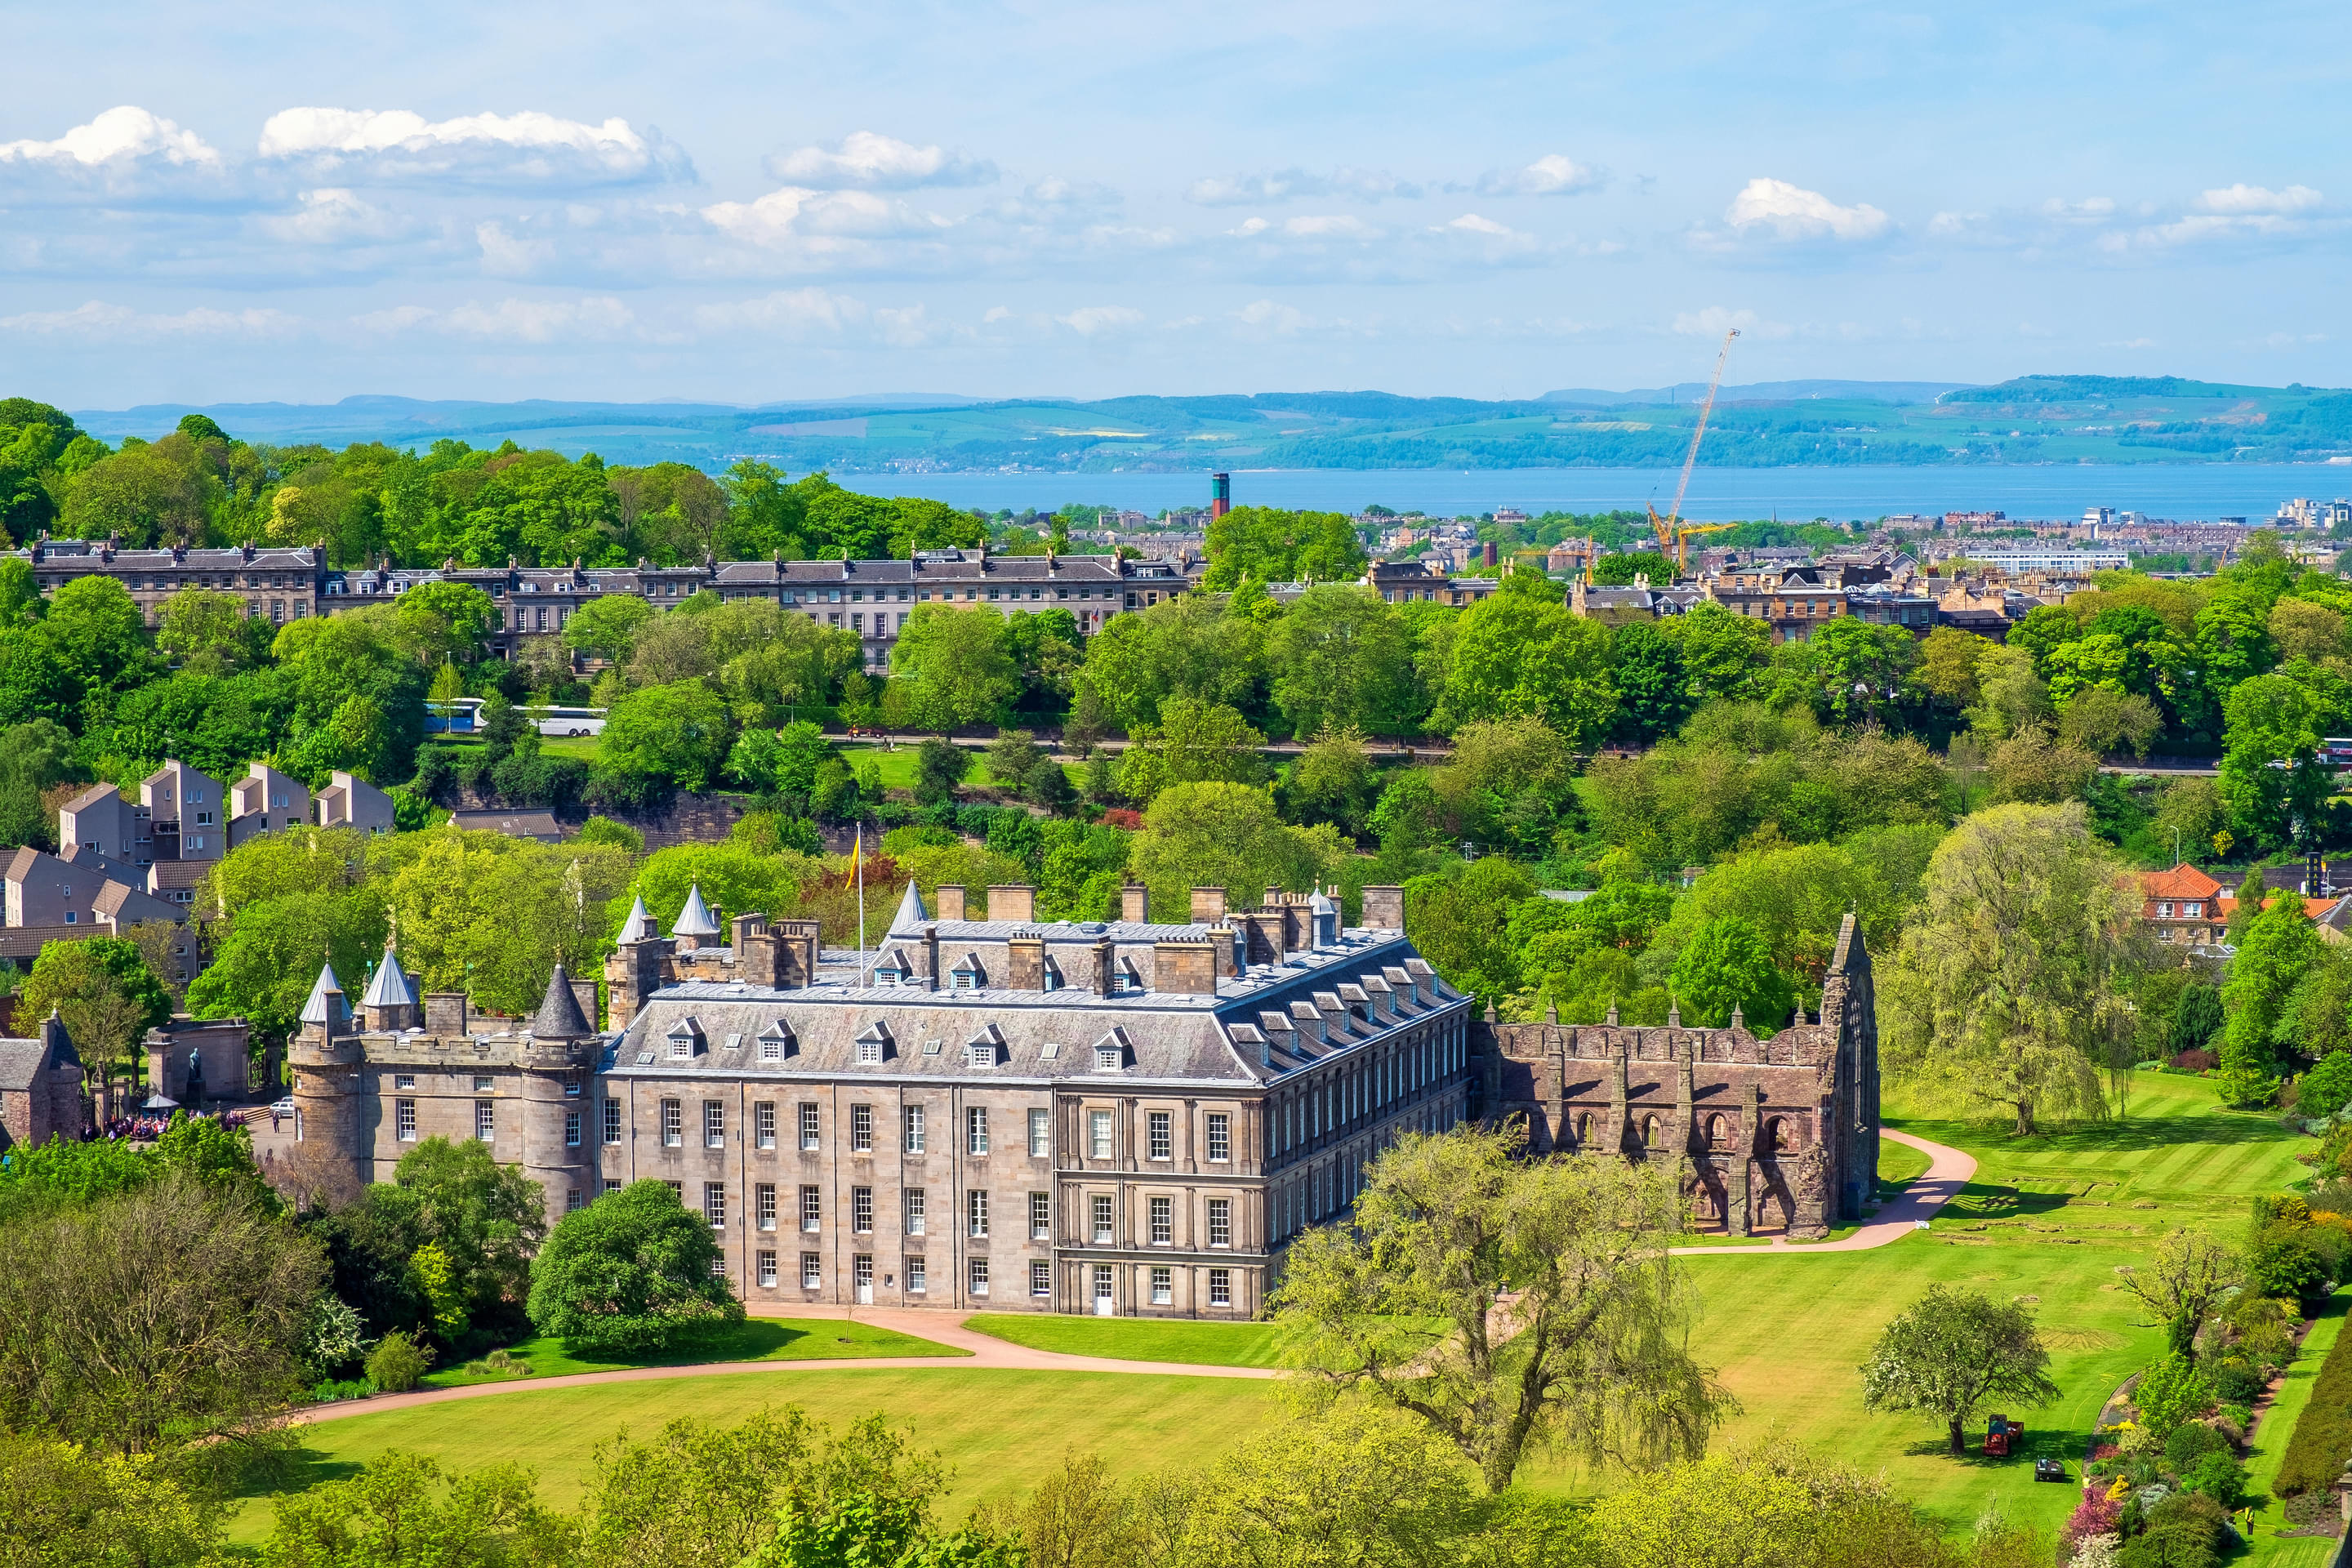 Palace Of Holyroodhouse Overview